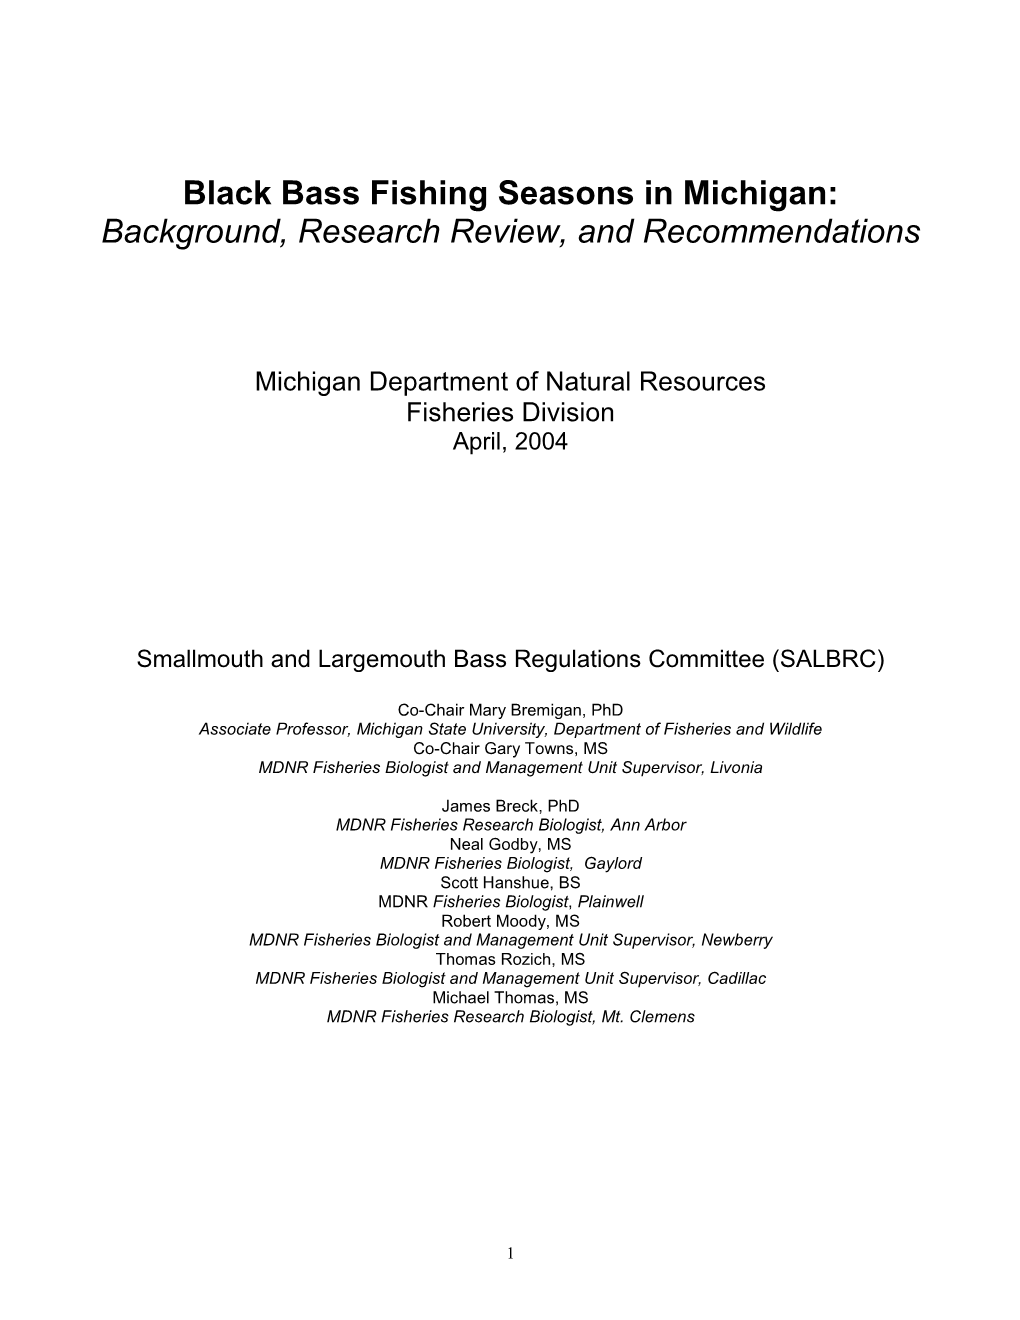 Black Bass Fishing Seasons in Michigan: Background, Research Review, and Recommendations